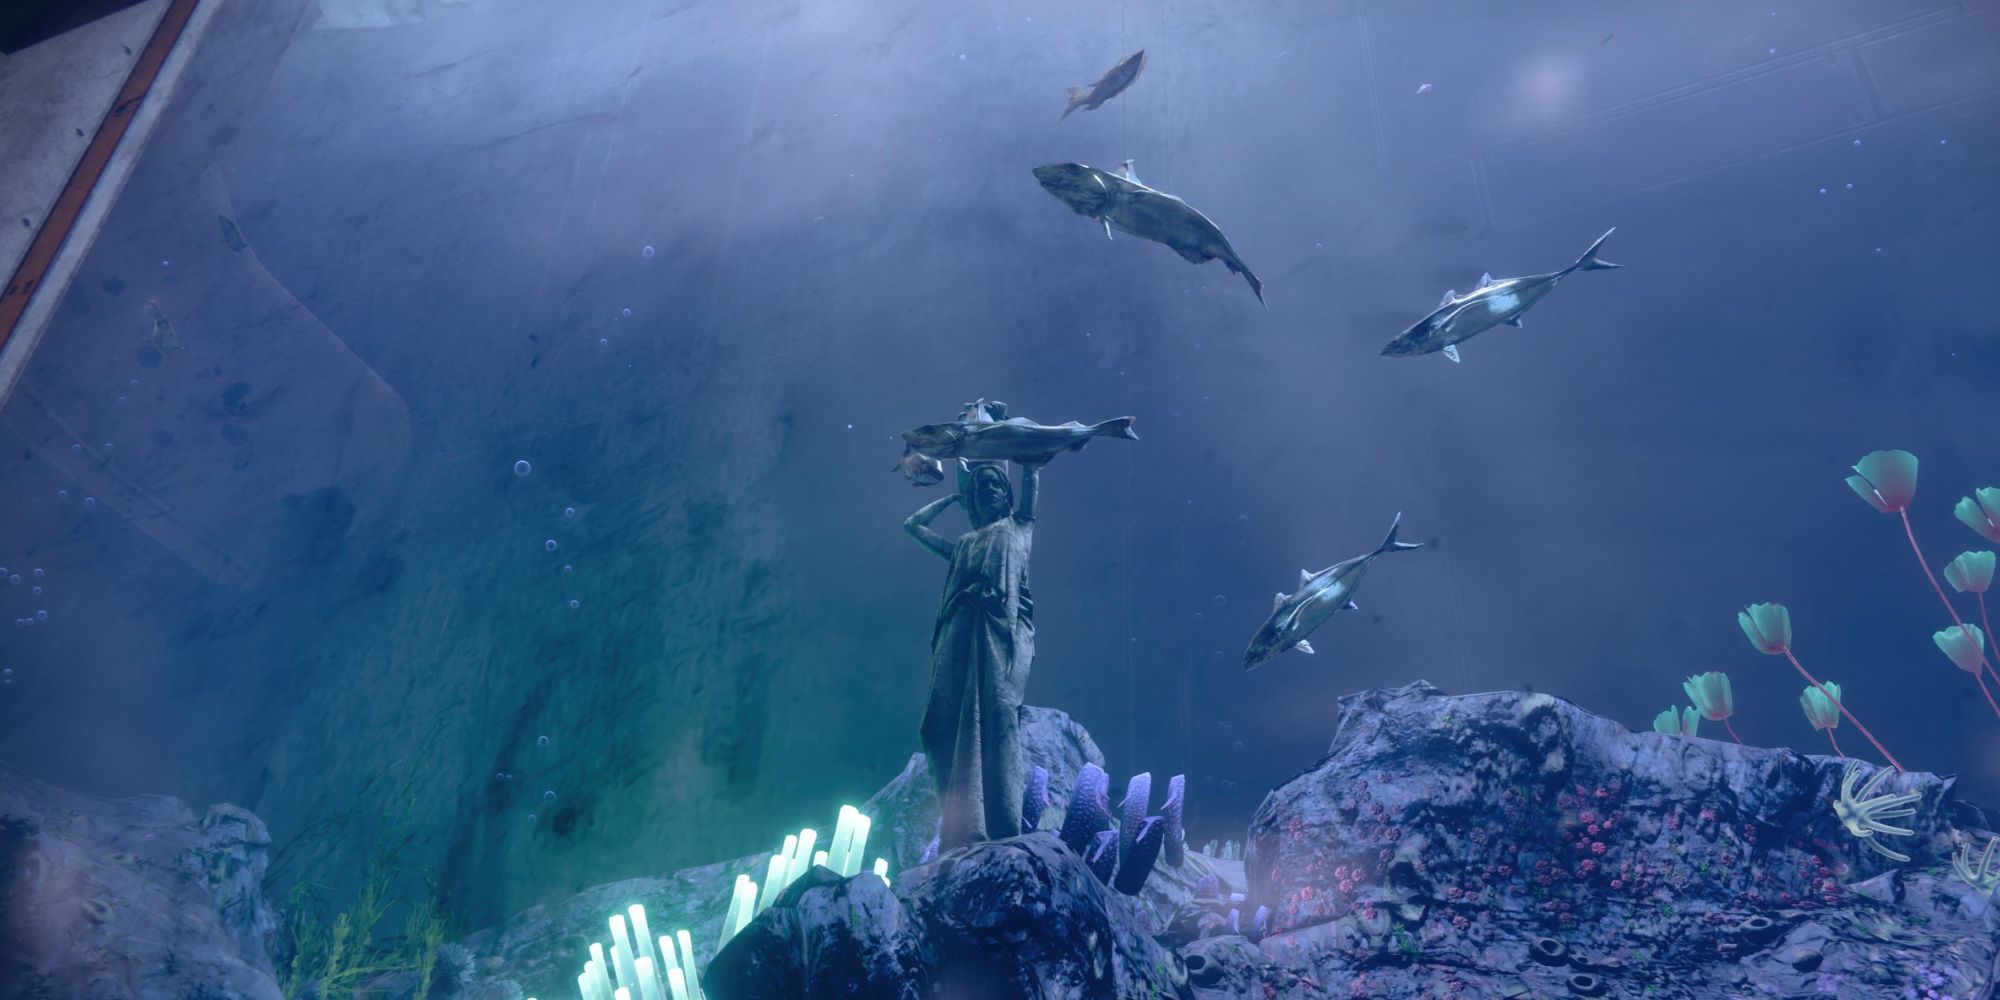 A player looking at a statue in the water surrounded by fish in Destiny 2